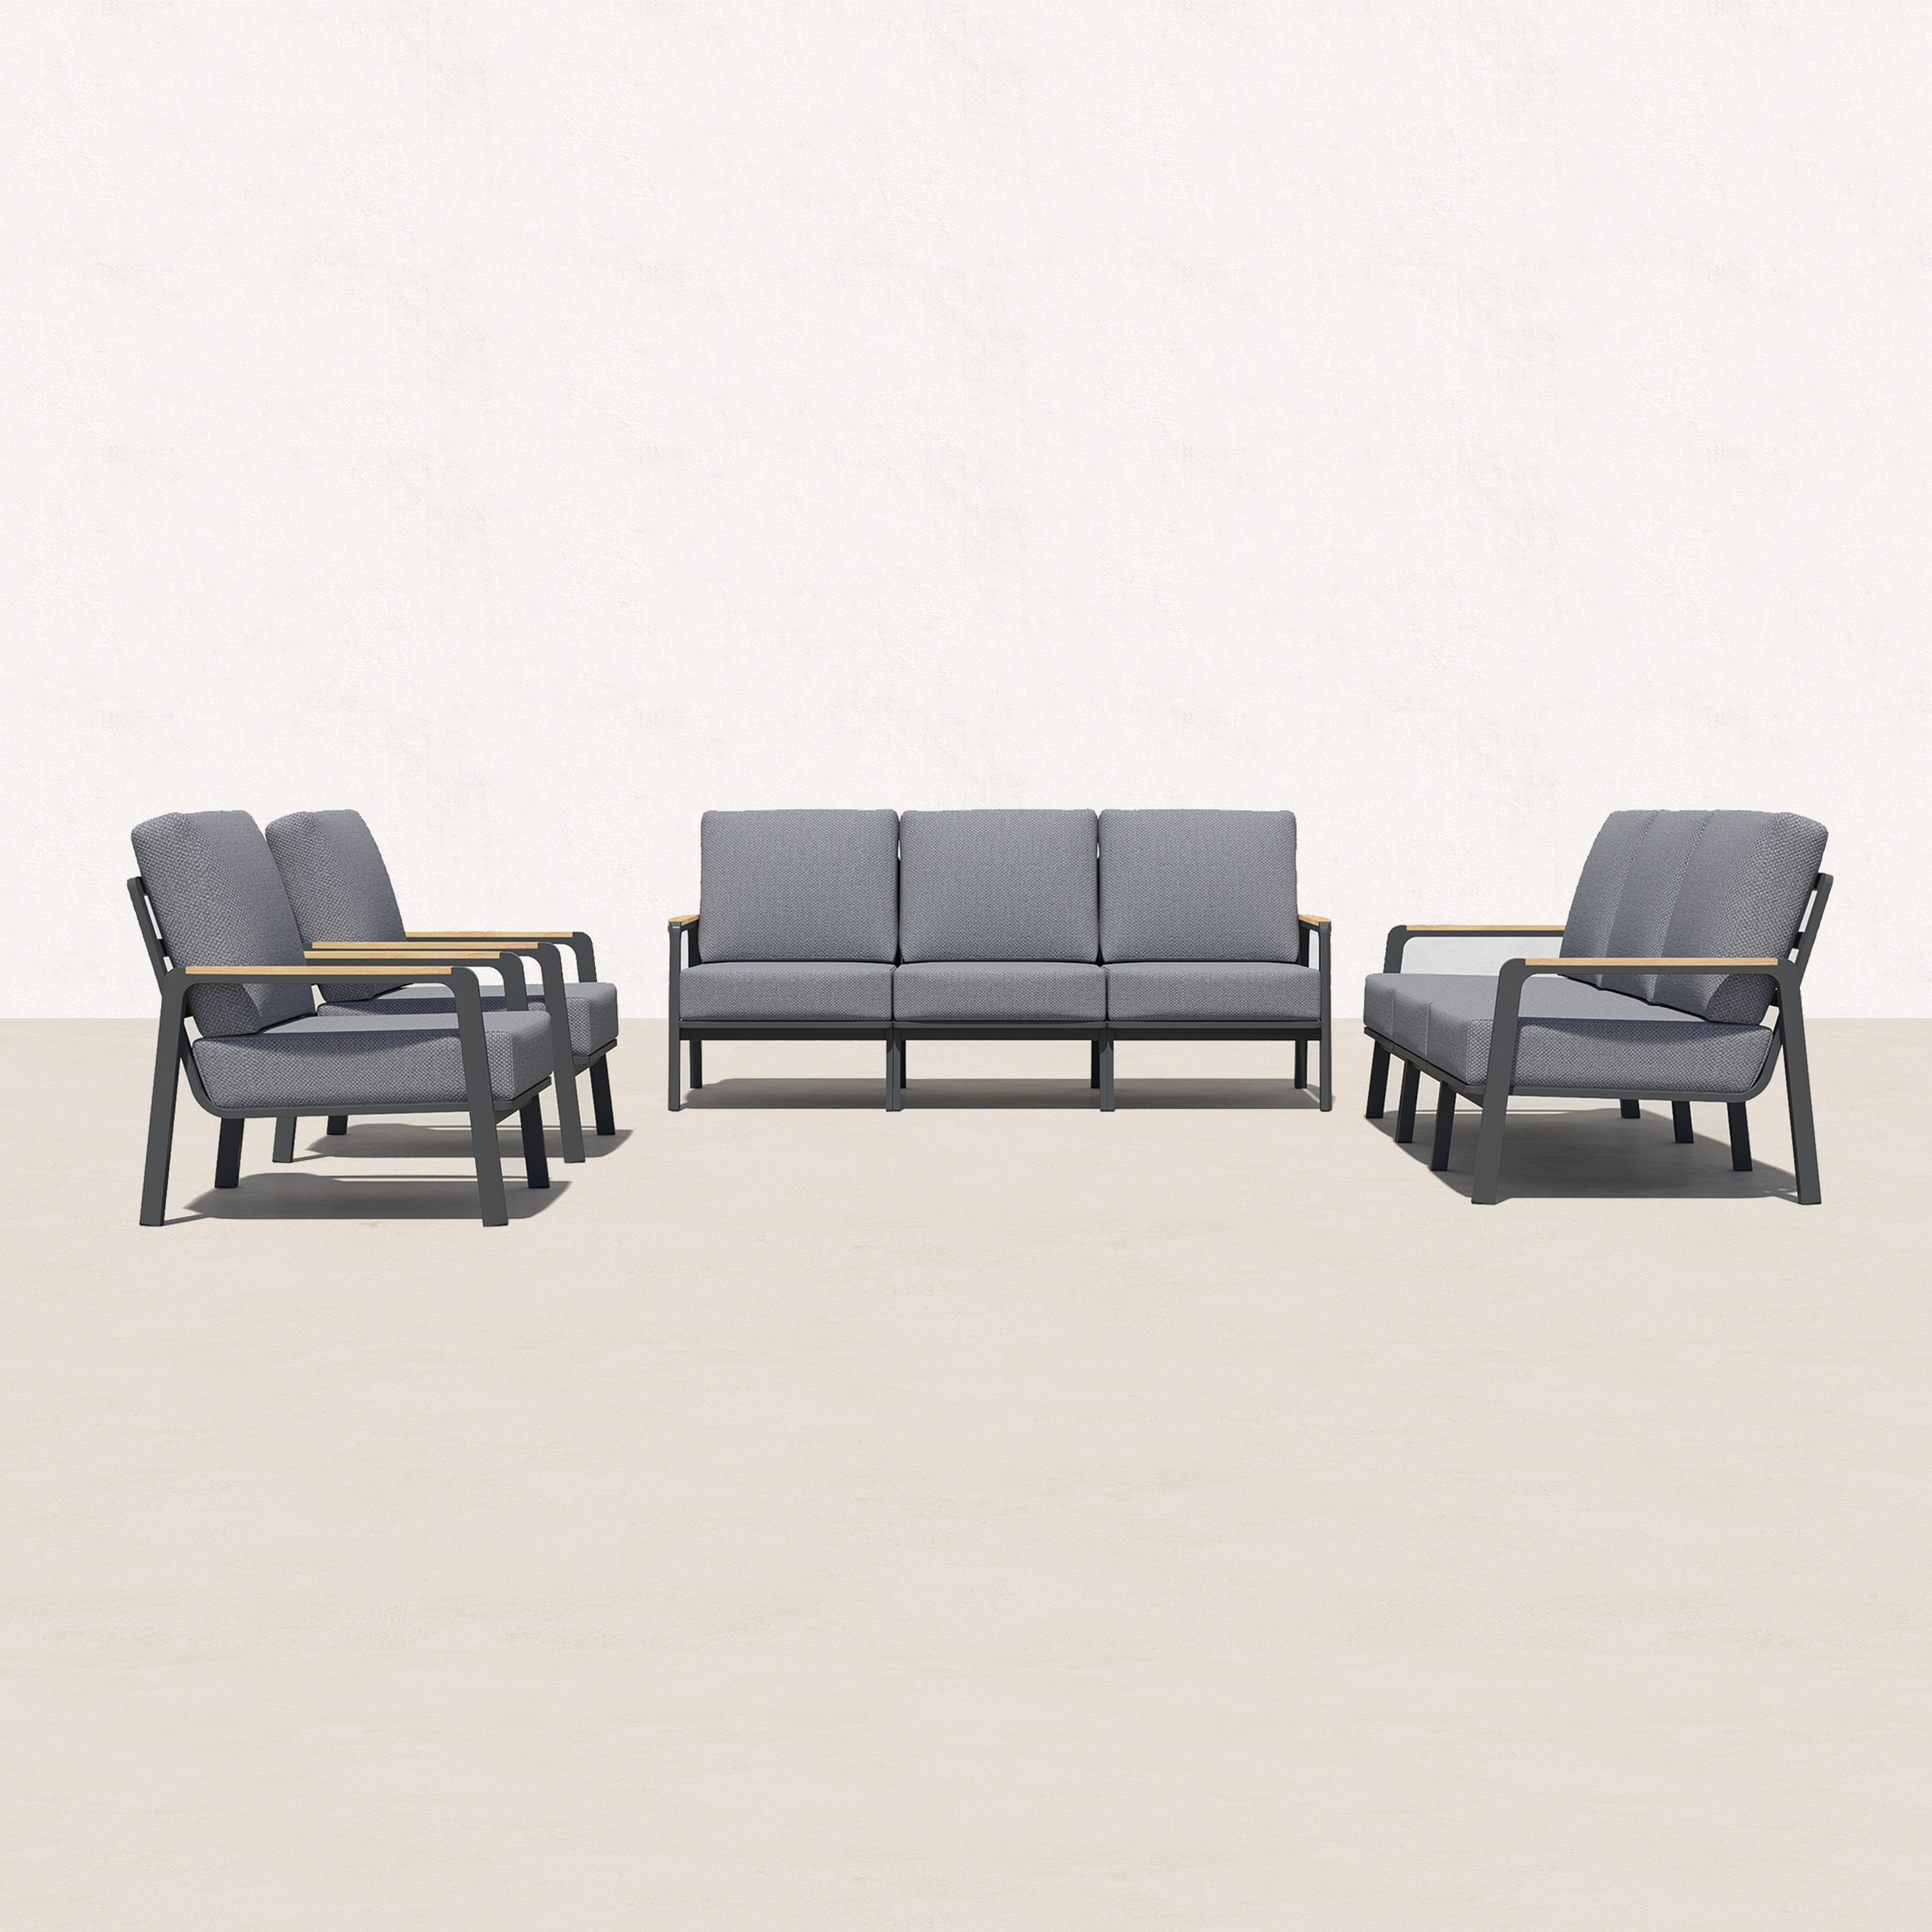 Orion Teak Outdoor Seating Group - 8 Seat